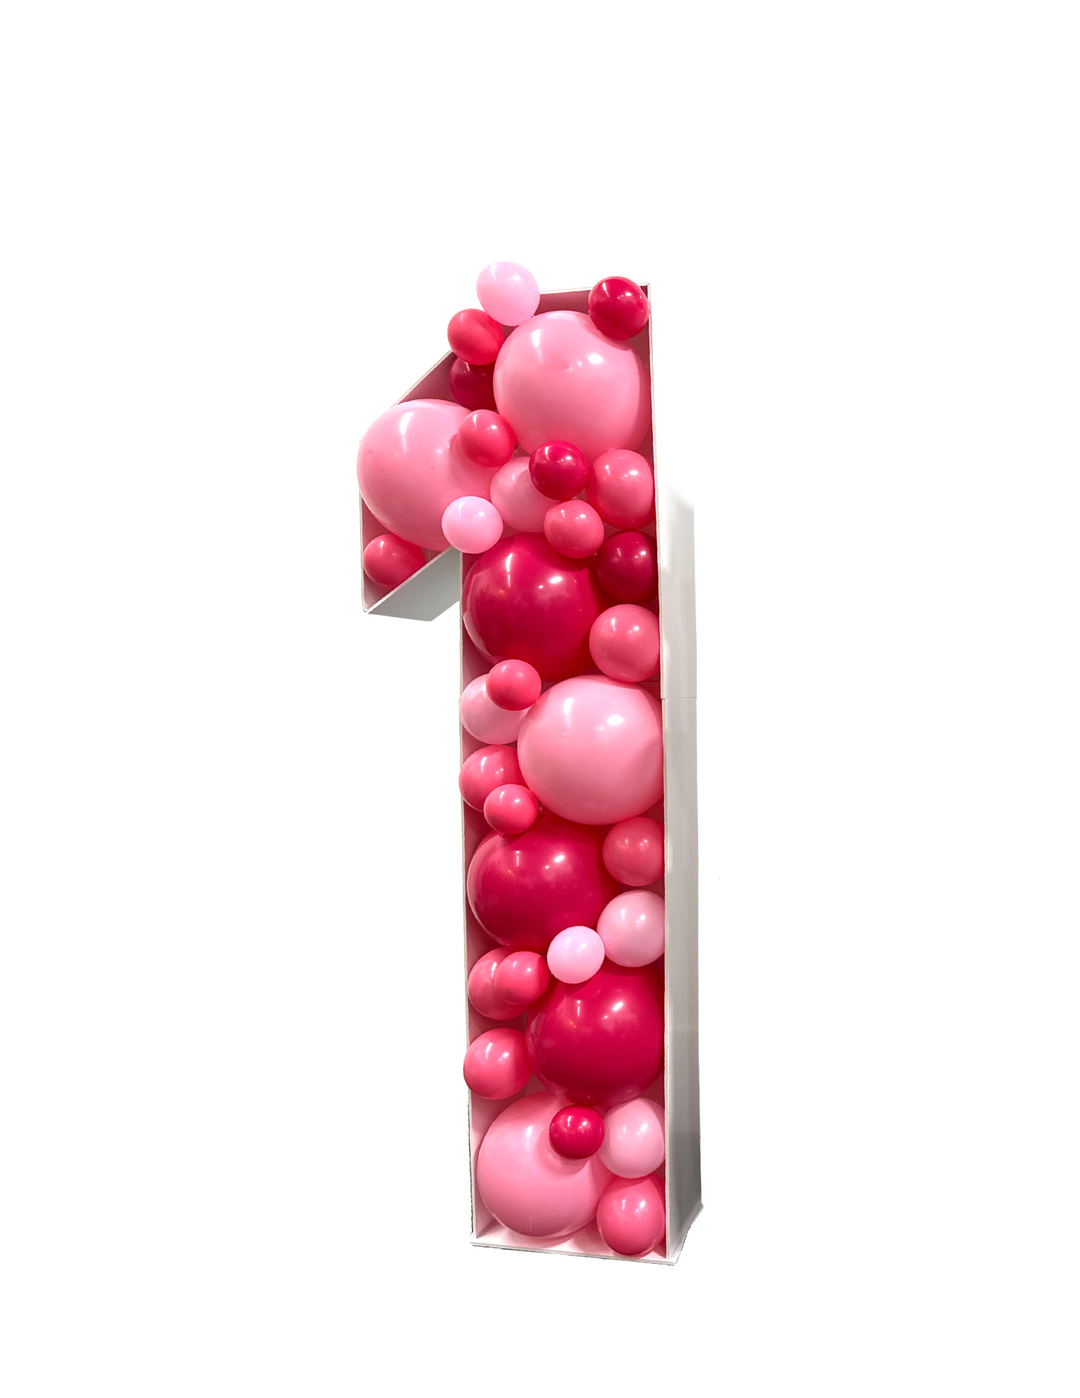 4ft Mosaic Number filled with Balloons (QTY: 1)